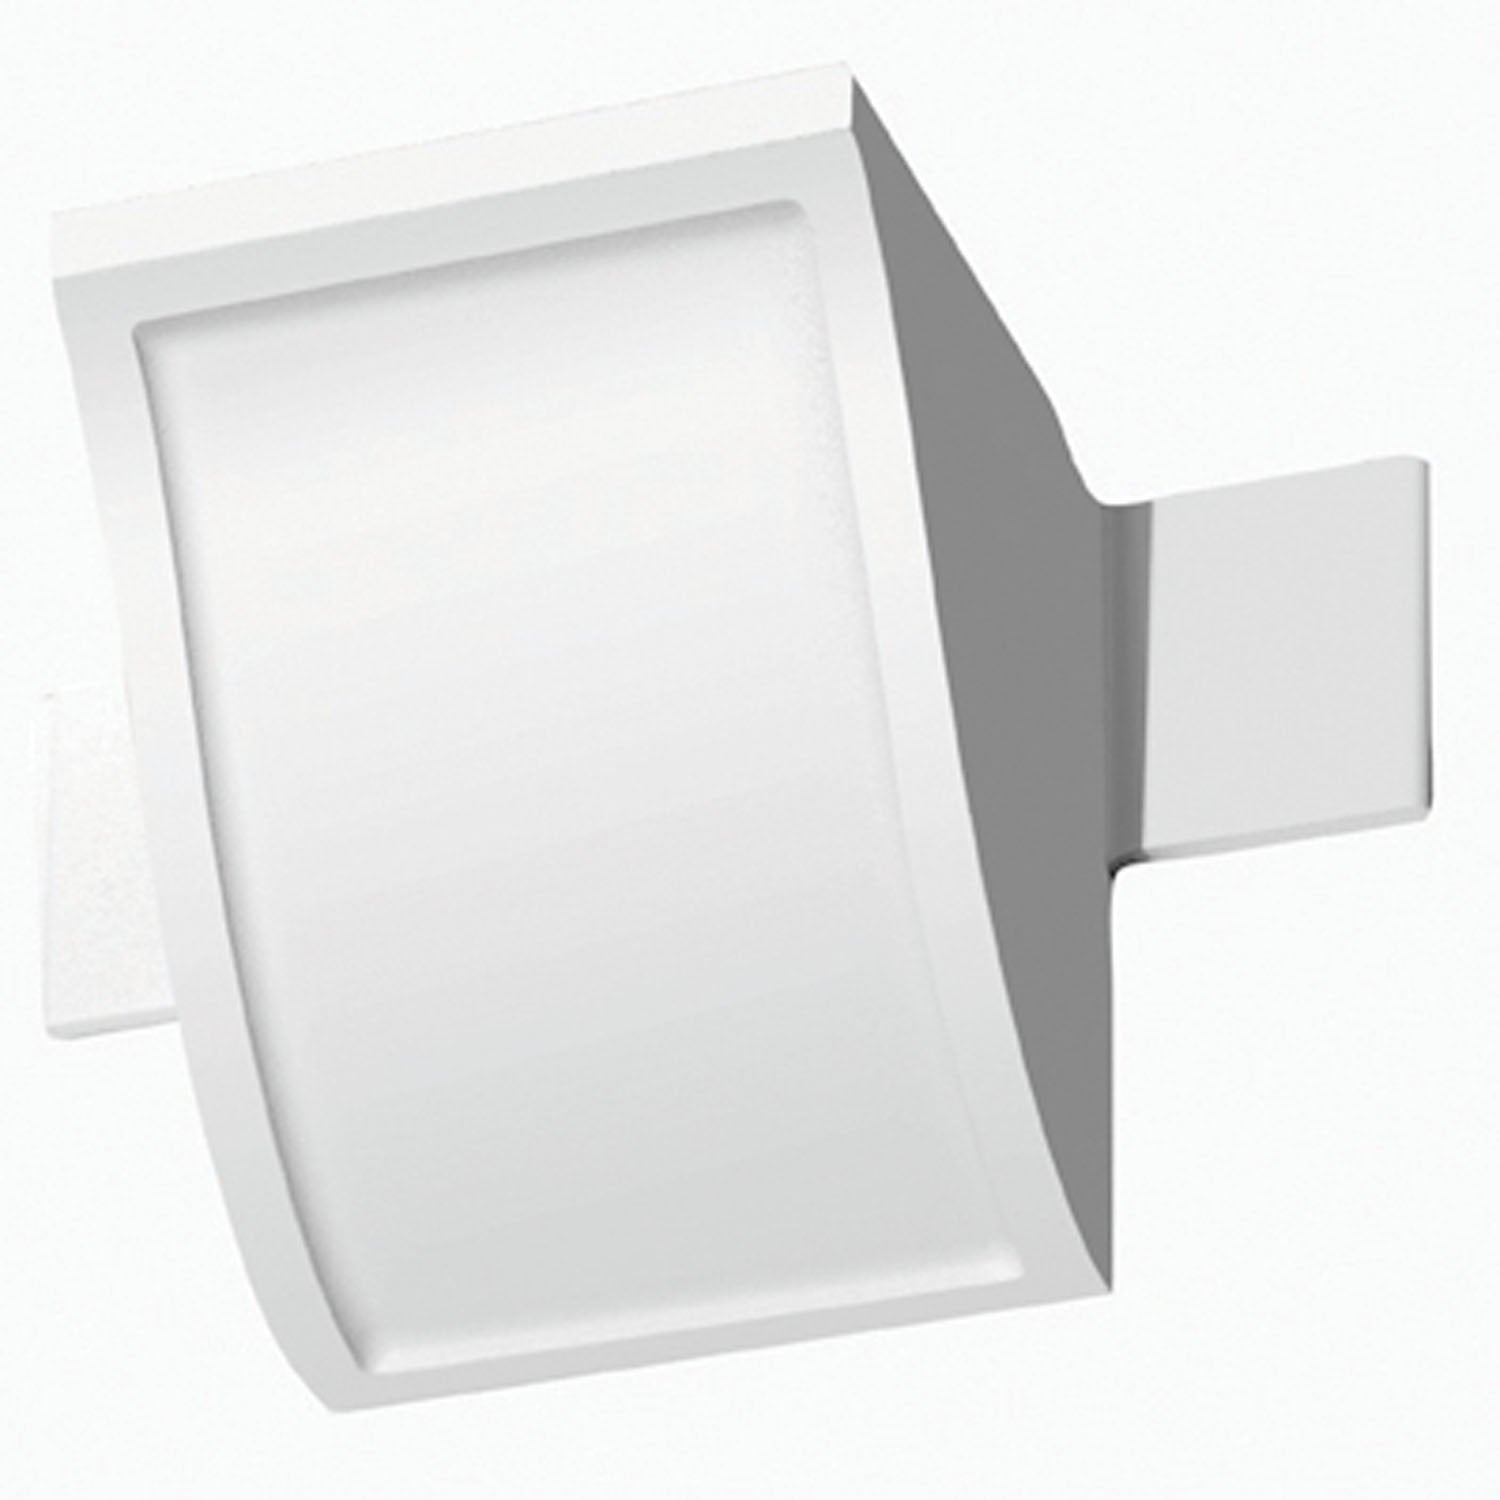 Focal Point Lighting 21625 Accessories 4 1/8 Quick Clips System A Connector Block Decor White